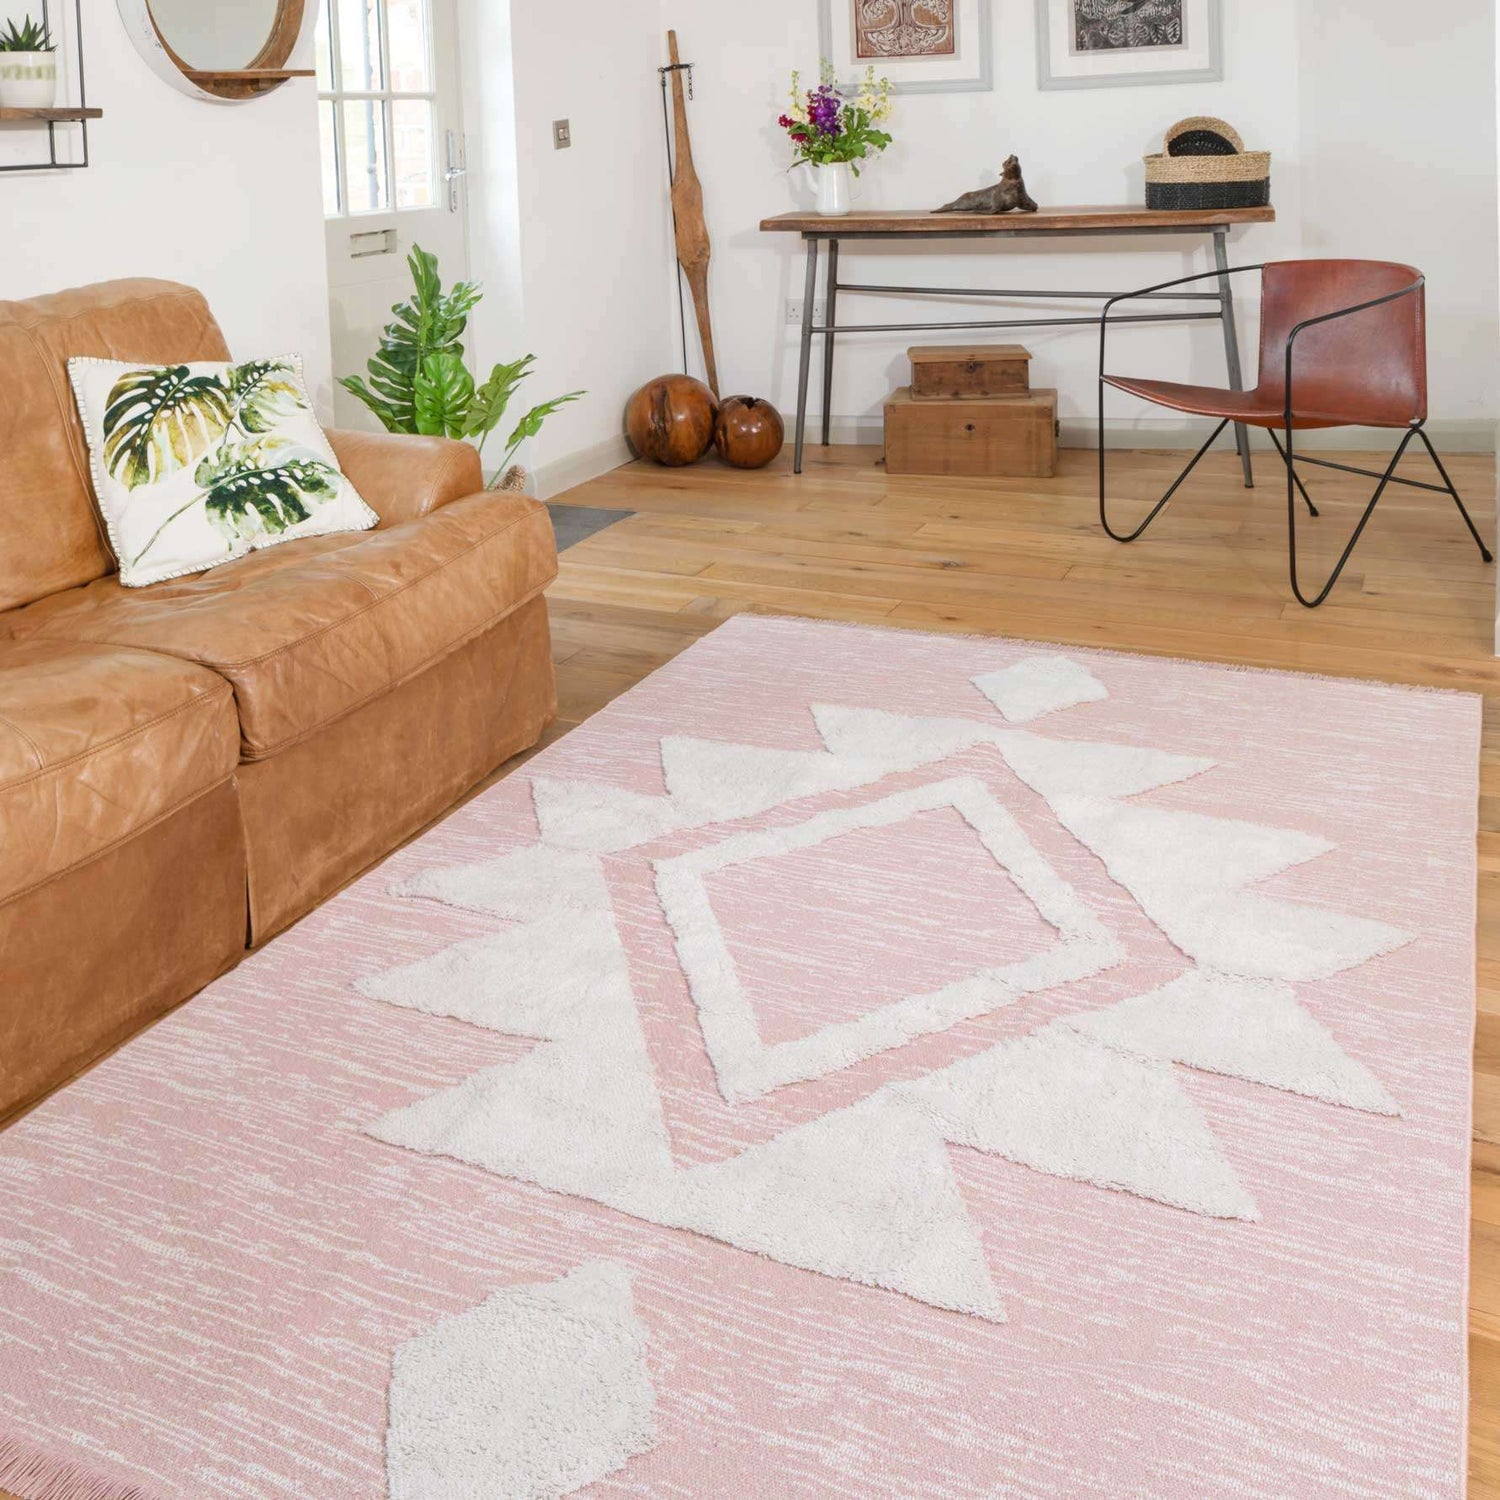 Tufted Tribal Blush Pink Sustainable Rug